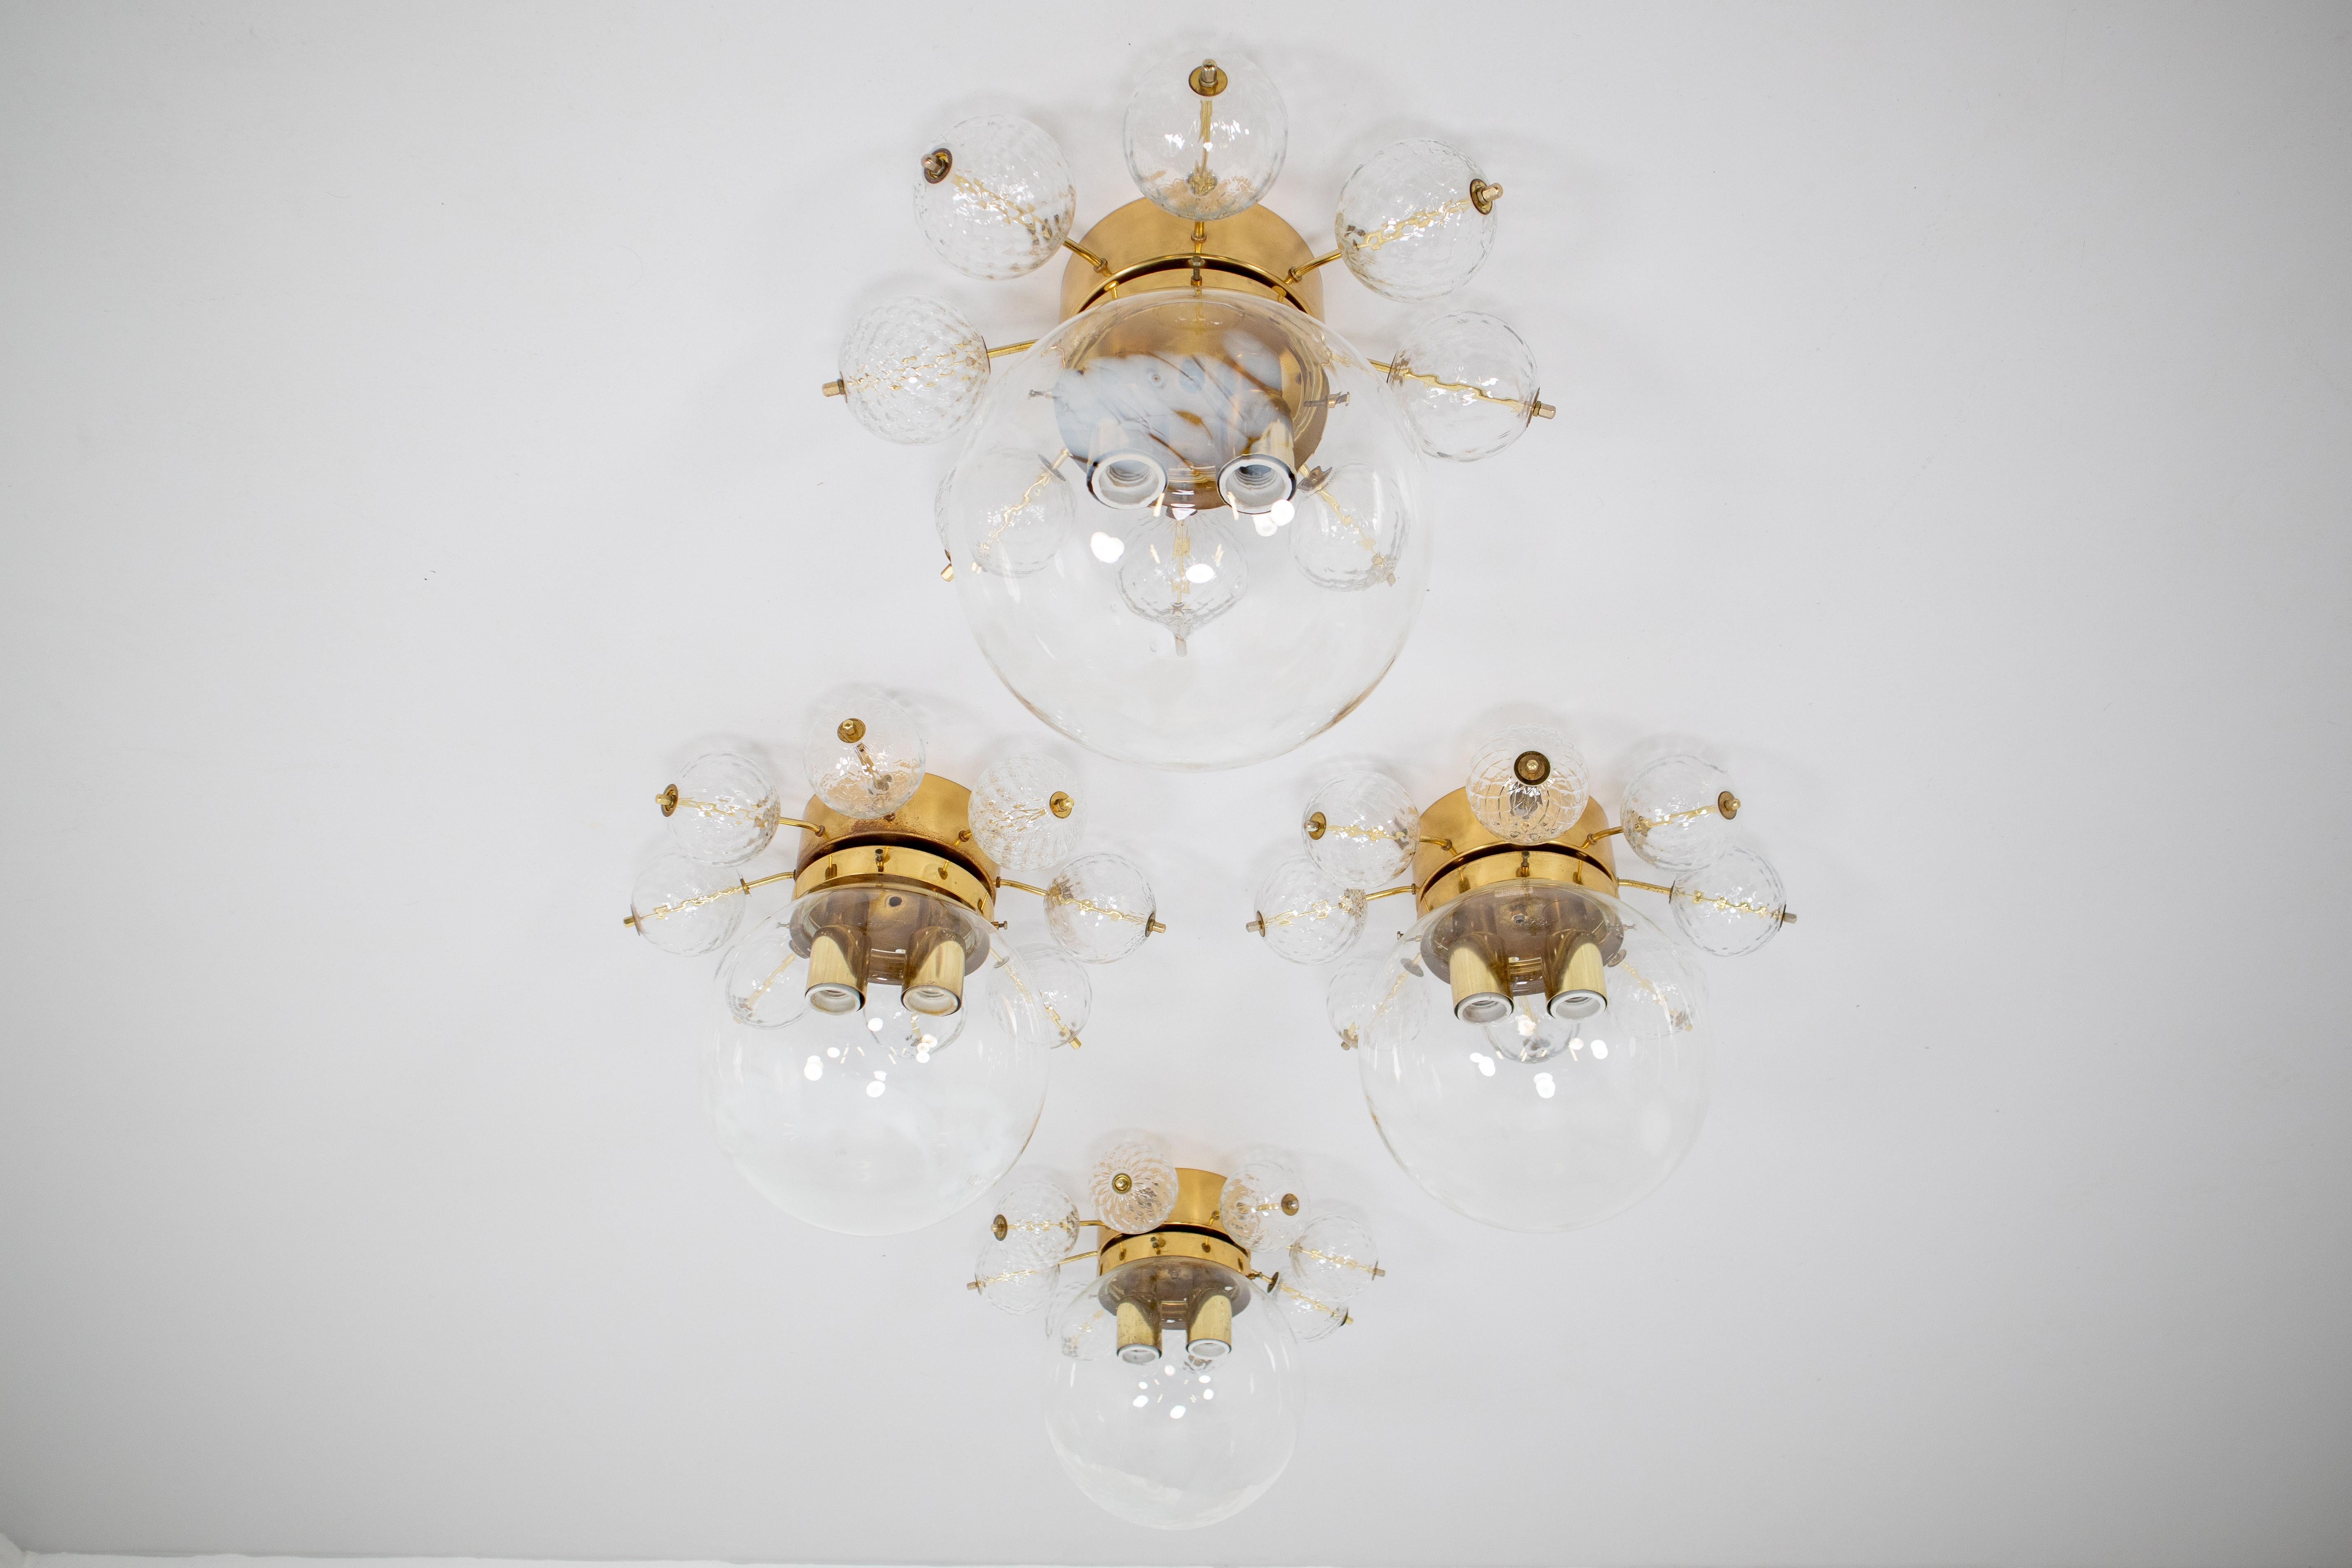 Large ceiling lamp-chandeliers with brass base and large handblown art-glass globe. These clear handblown glass globe are decorated with white streaks. The globe show a different and unique semi transparent, diffuse surface, which looks wonderful.